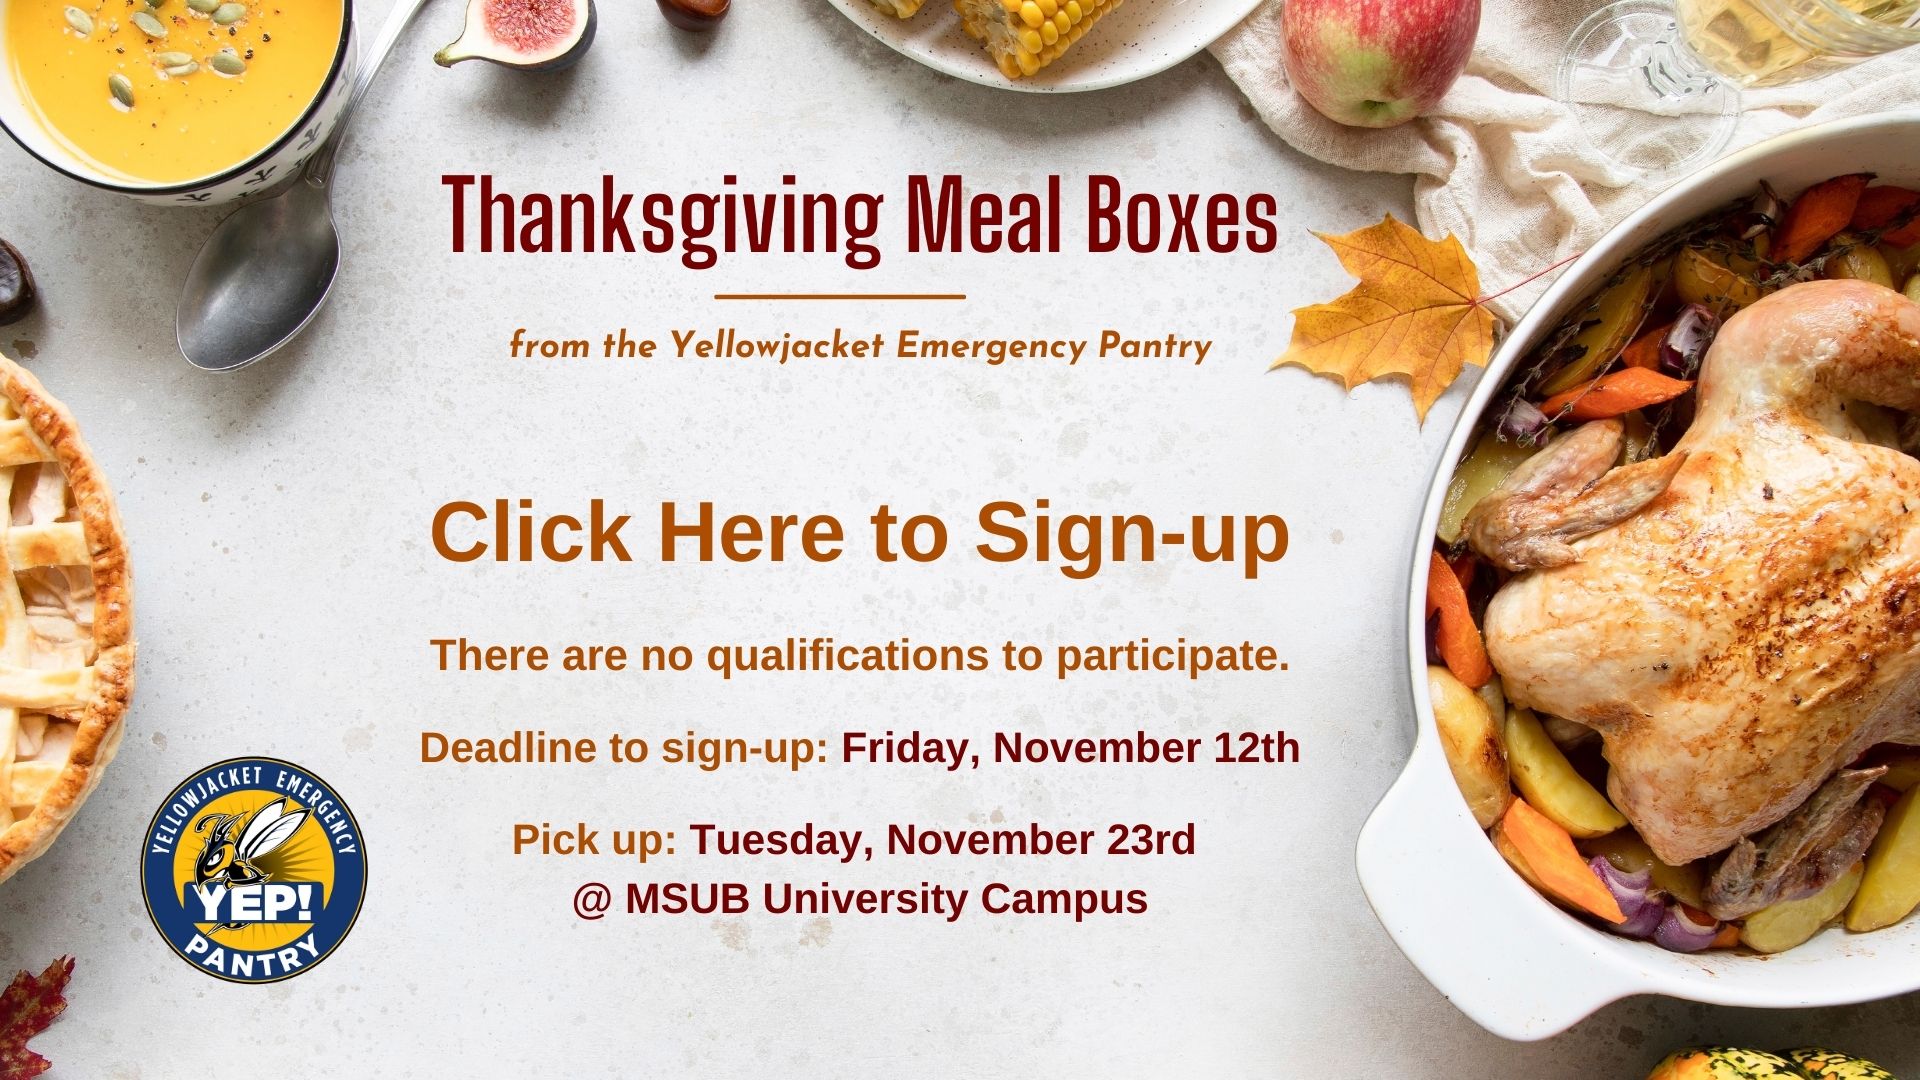 Thanksgiving Meal Boxes from the Yellowjacket Emergency Pantry. Click Here to Sign-up. There are no qualifications to participate. Deadline to sign-up: Friday, November 12th. Pick up: Tuesday, November 23rd @ MSUB University Campus.